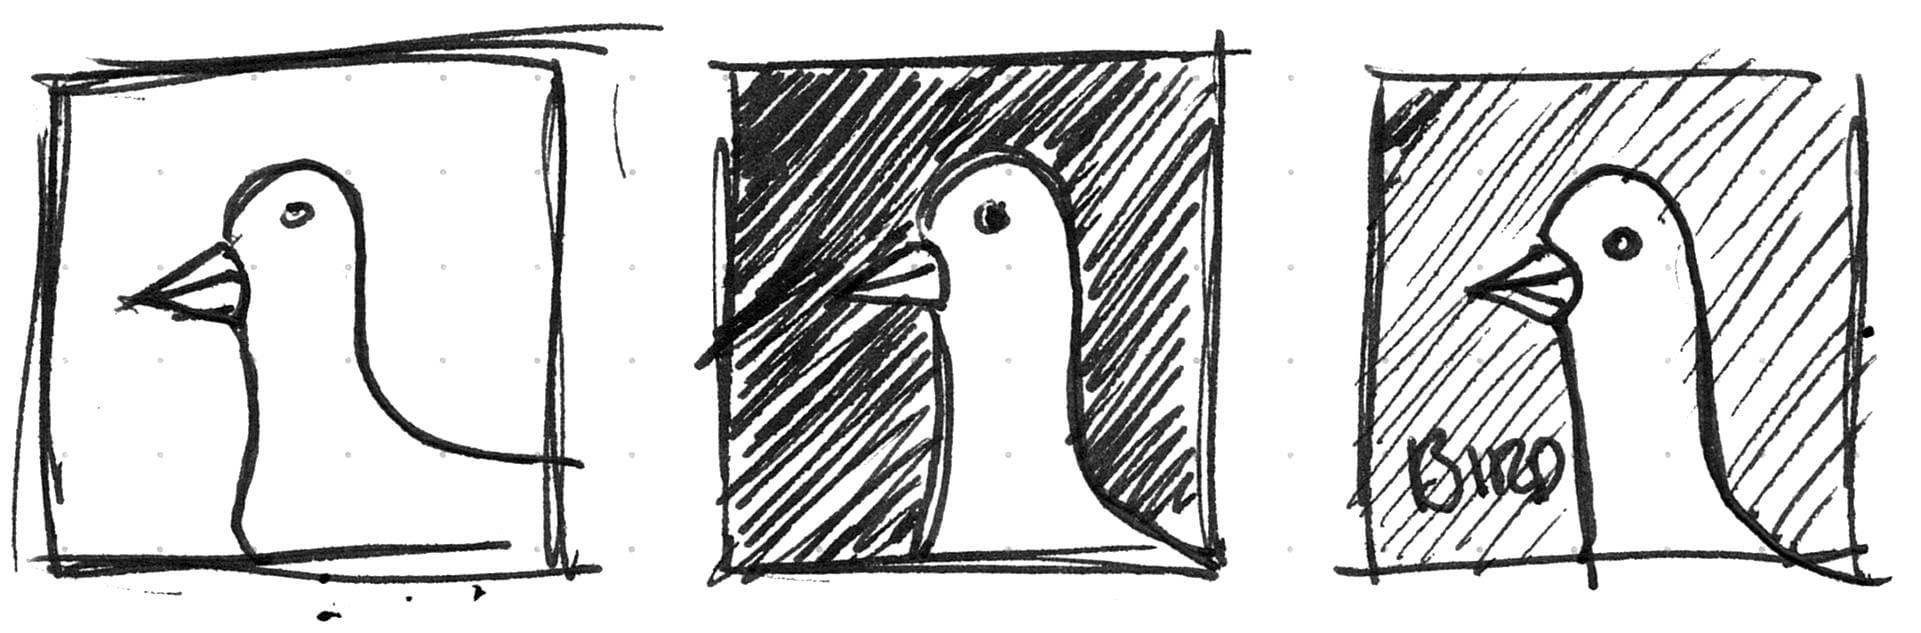 A series of sketched frames with birds in them. The second and third frames contain a dark and light fill to help demonstrate contrast